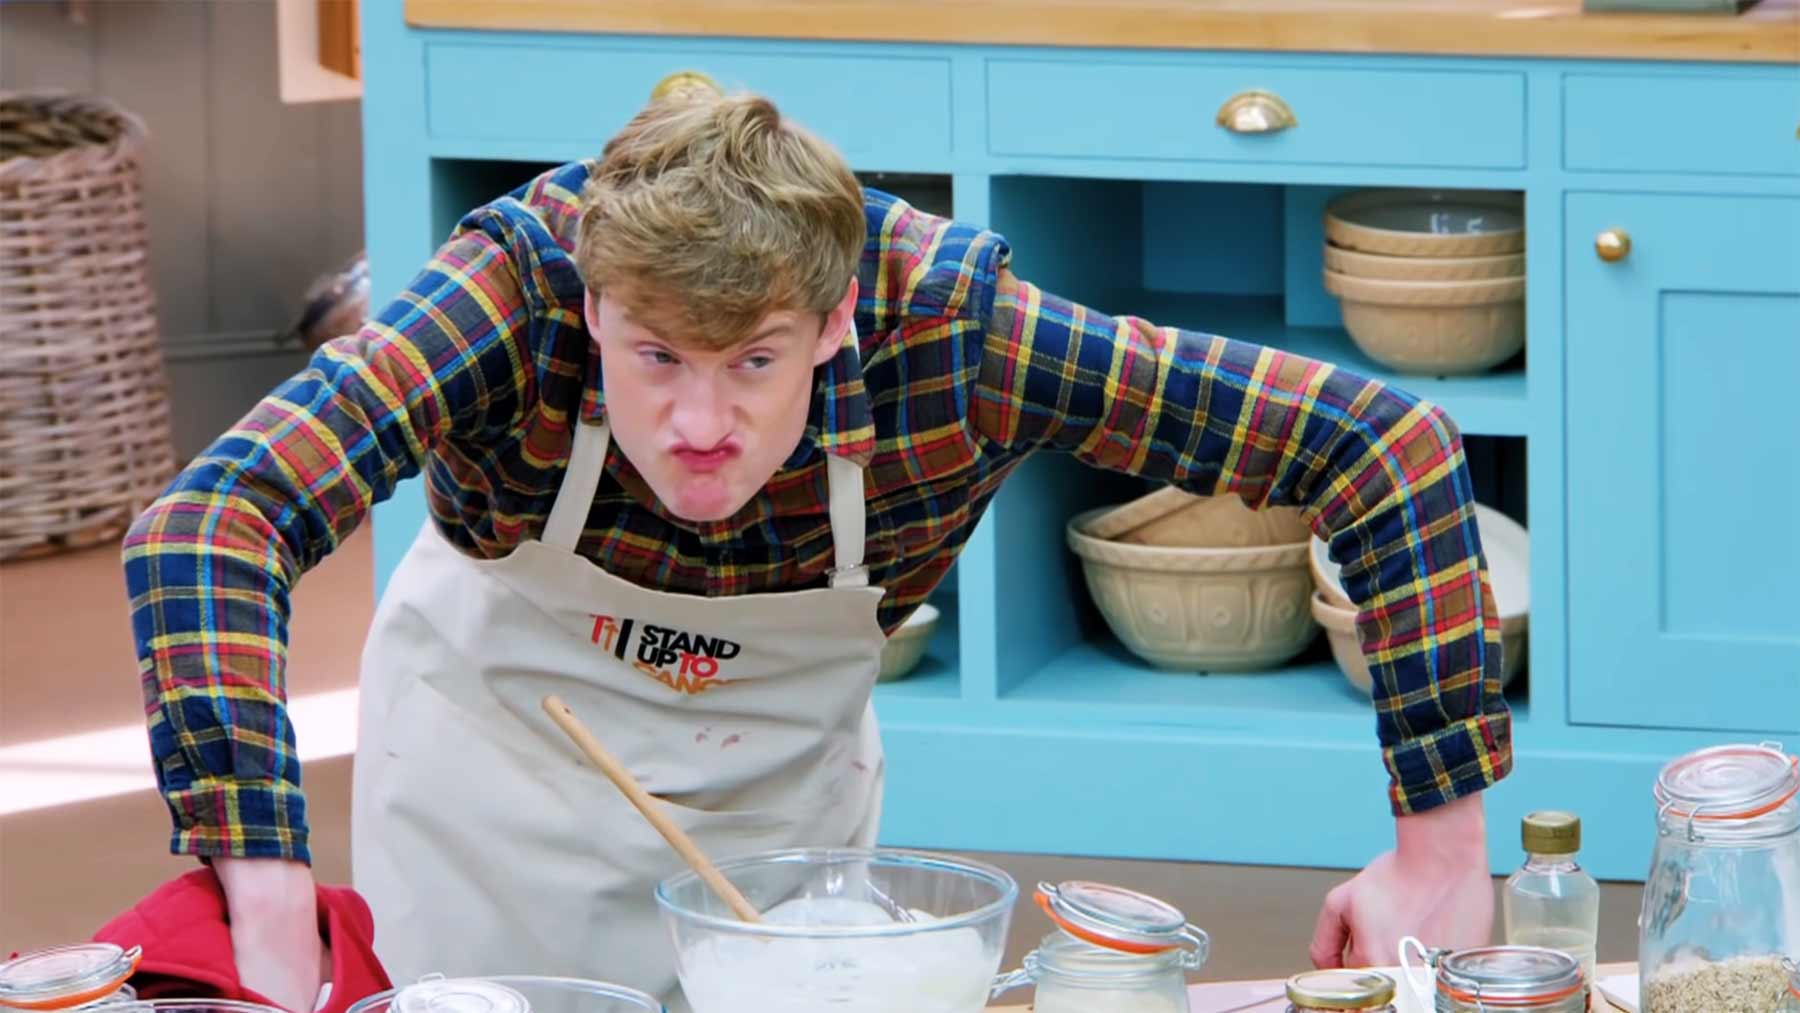 Comedian James Acaster bei "The Great British Bake Off" James-Acaster-the-great-british-bake-off 